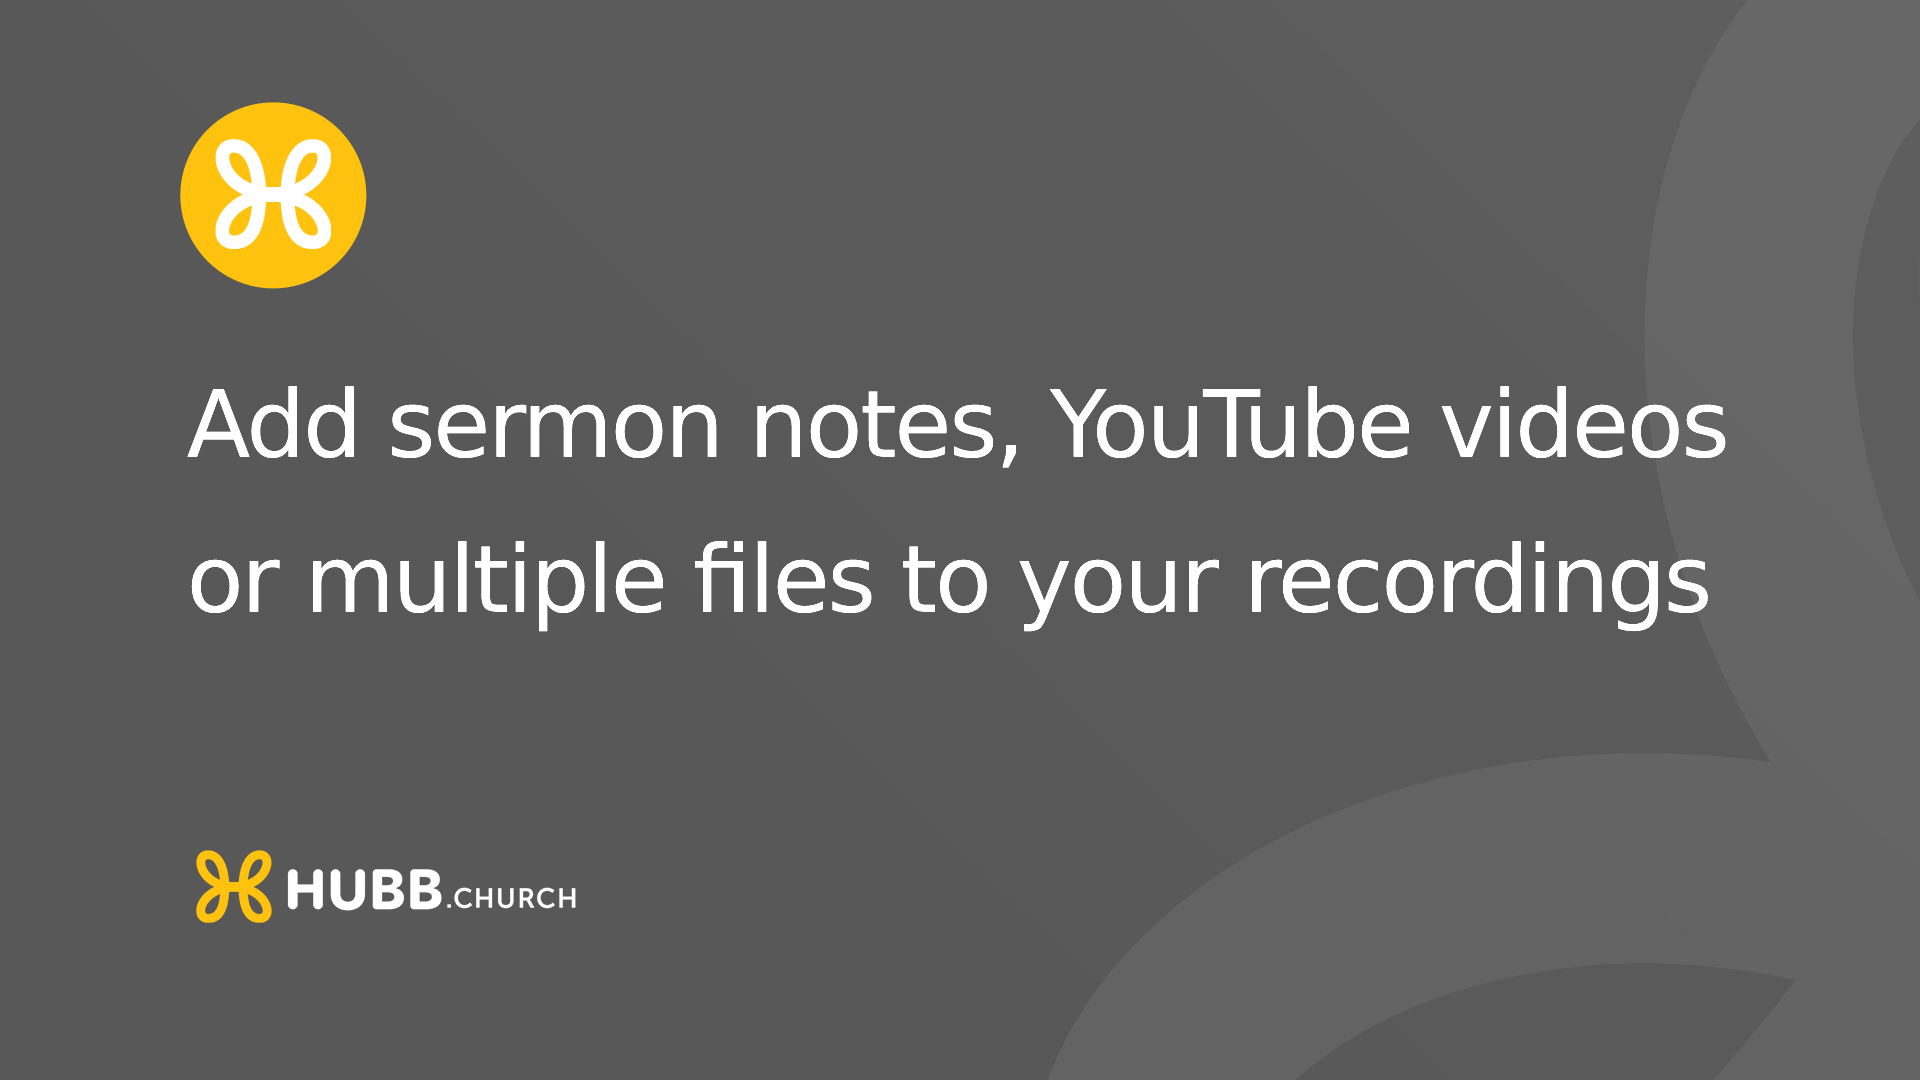 Add sermon notes, YouTube video or multiple files to your recordings